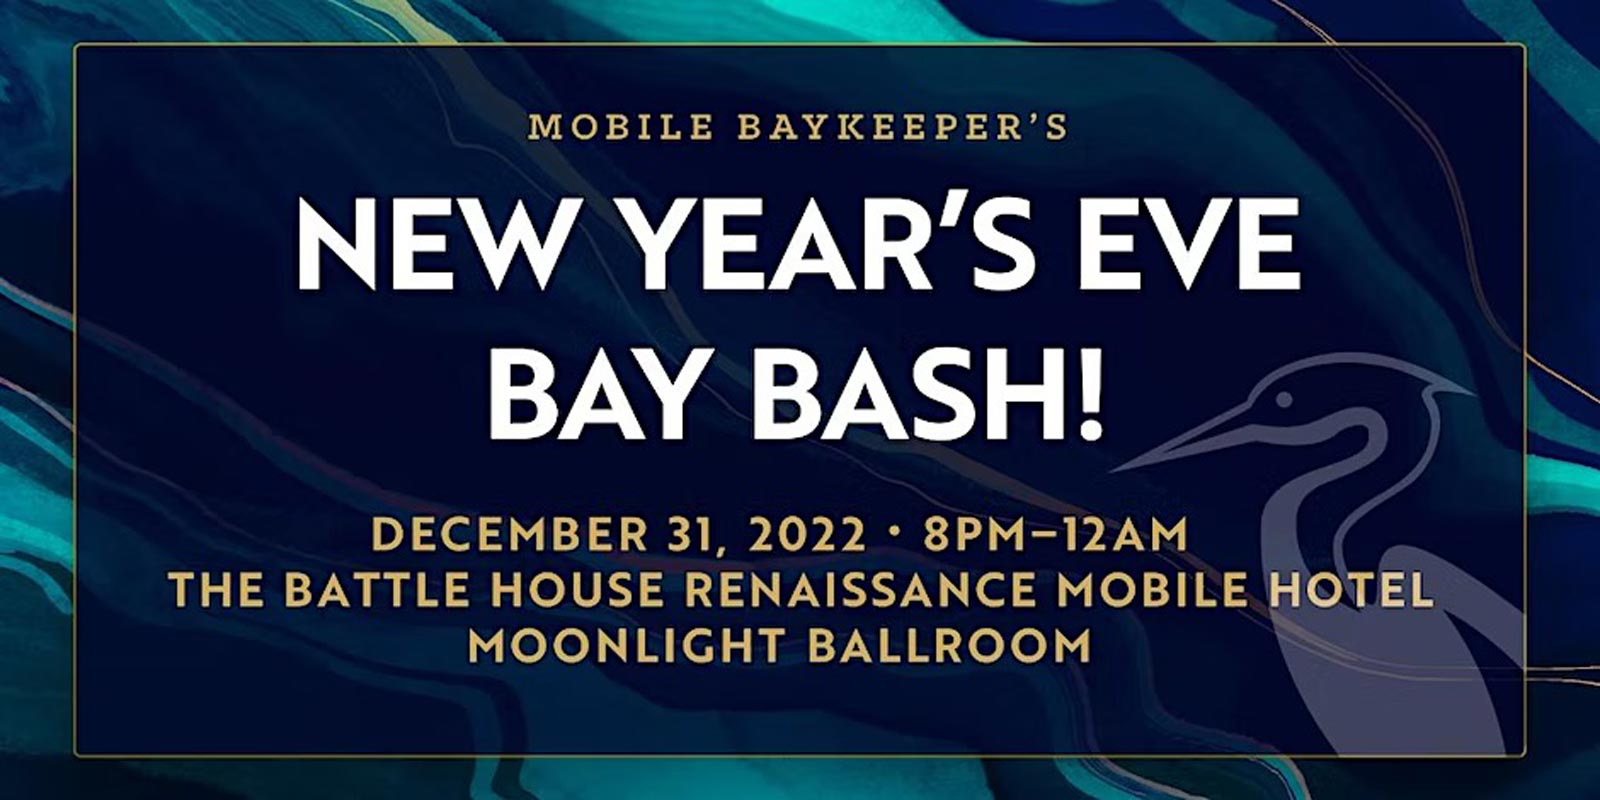 Mobile Baykeeper Announces New Year’s Party